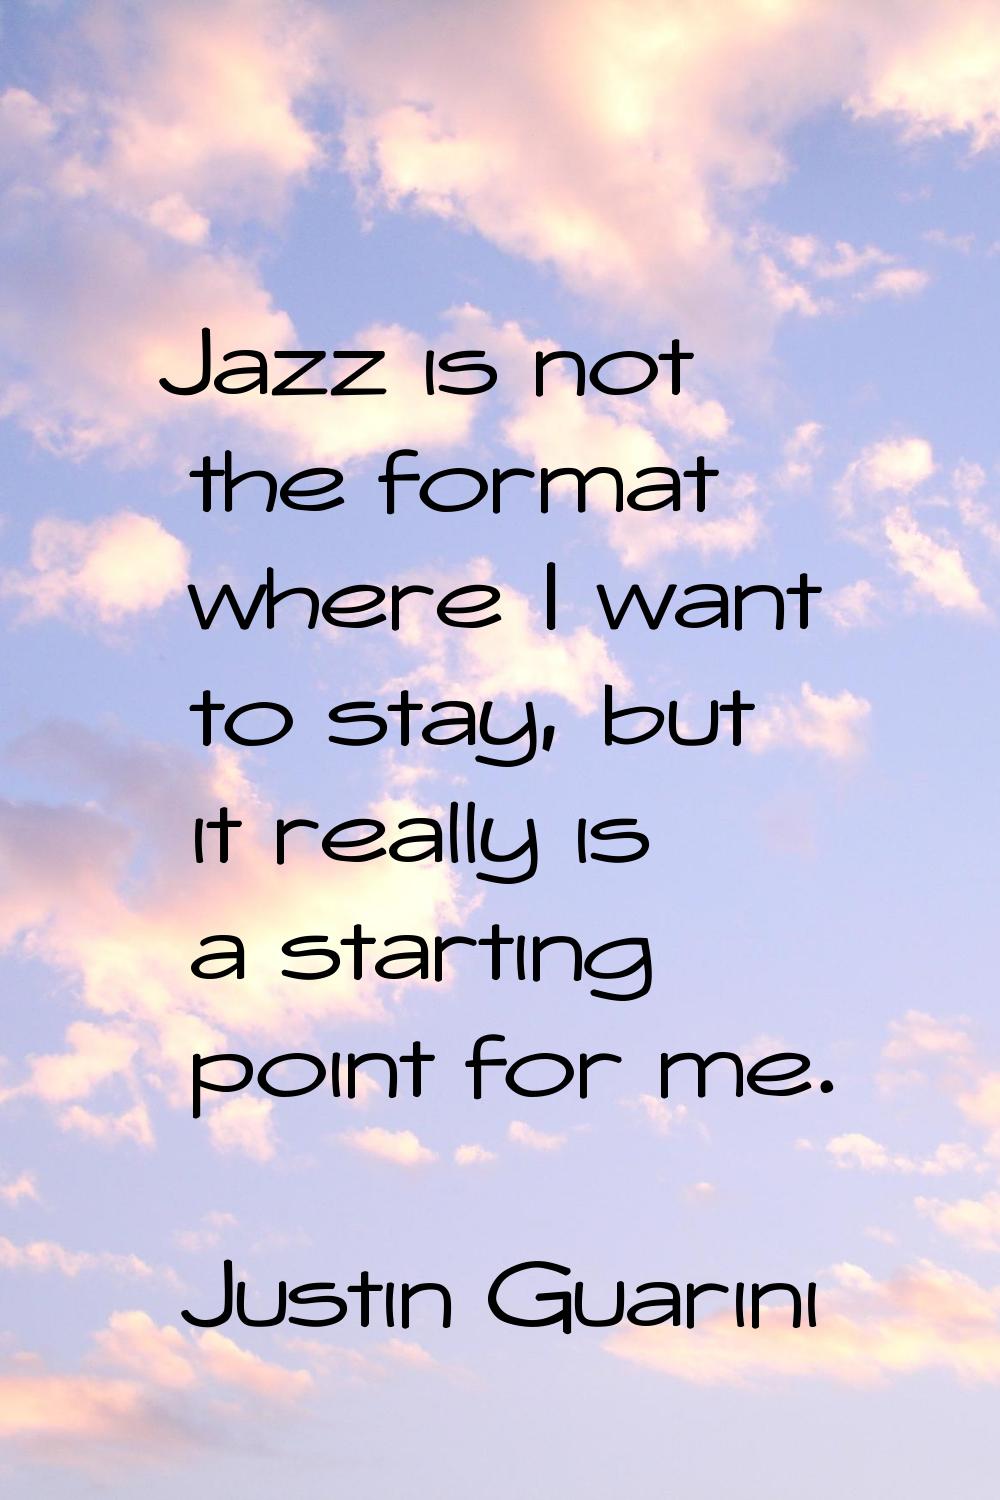 Jazz is not the format where I want to stay, but it really is a starting point for me.